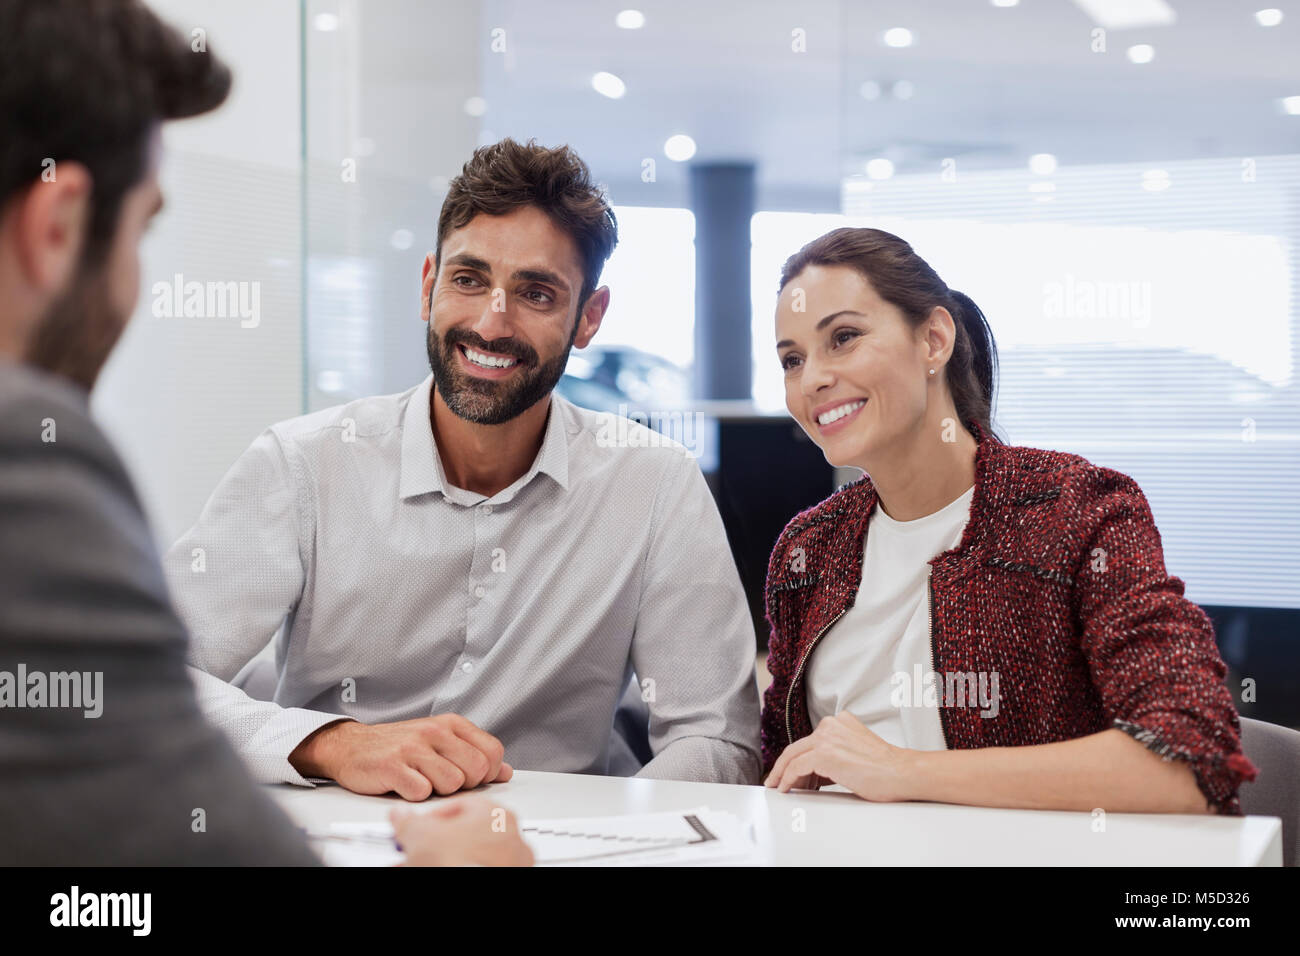 Smiling couple customers talking to car salesman in car dealership office Stock Photo